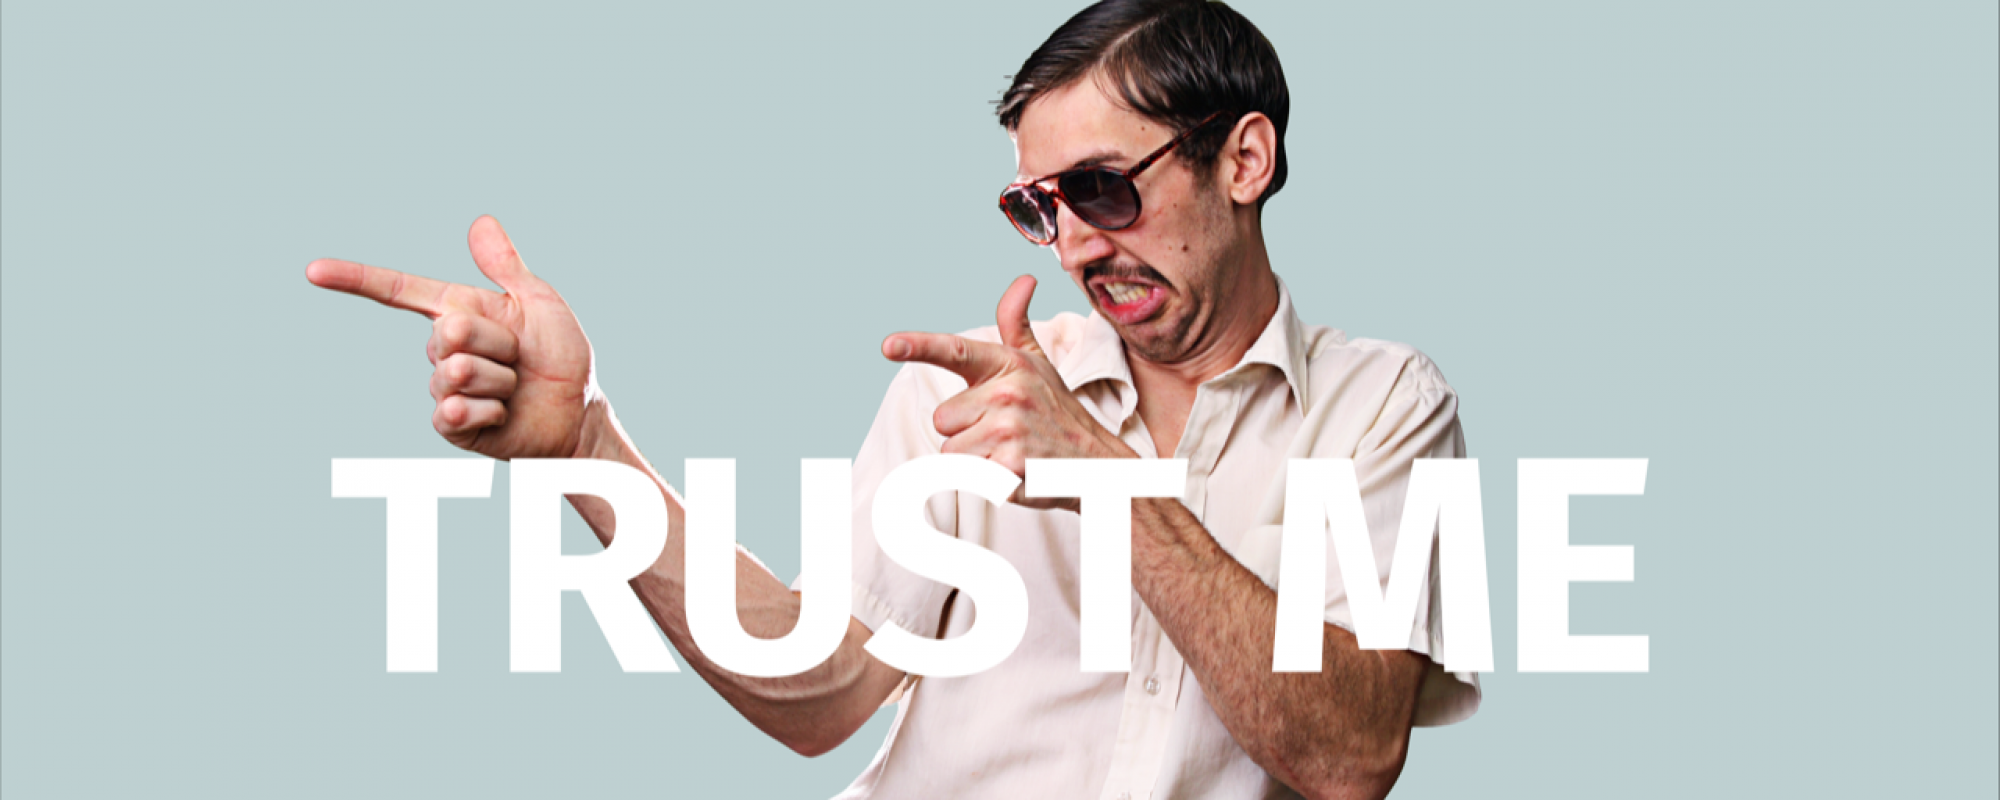 Image for “How to build trust in a world full of charlatans”